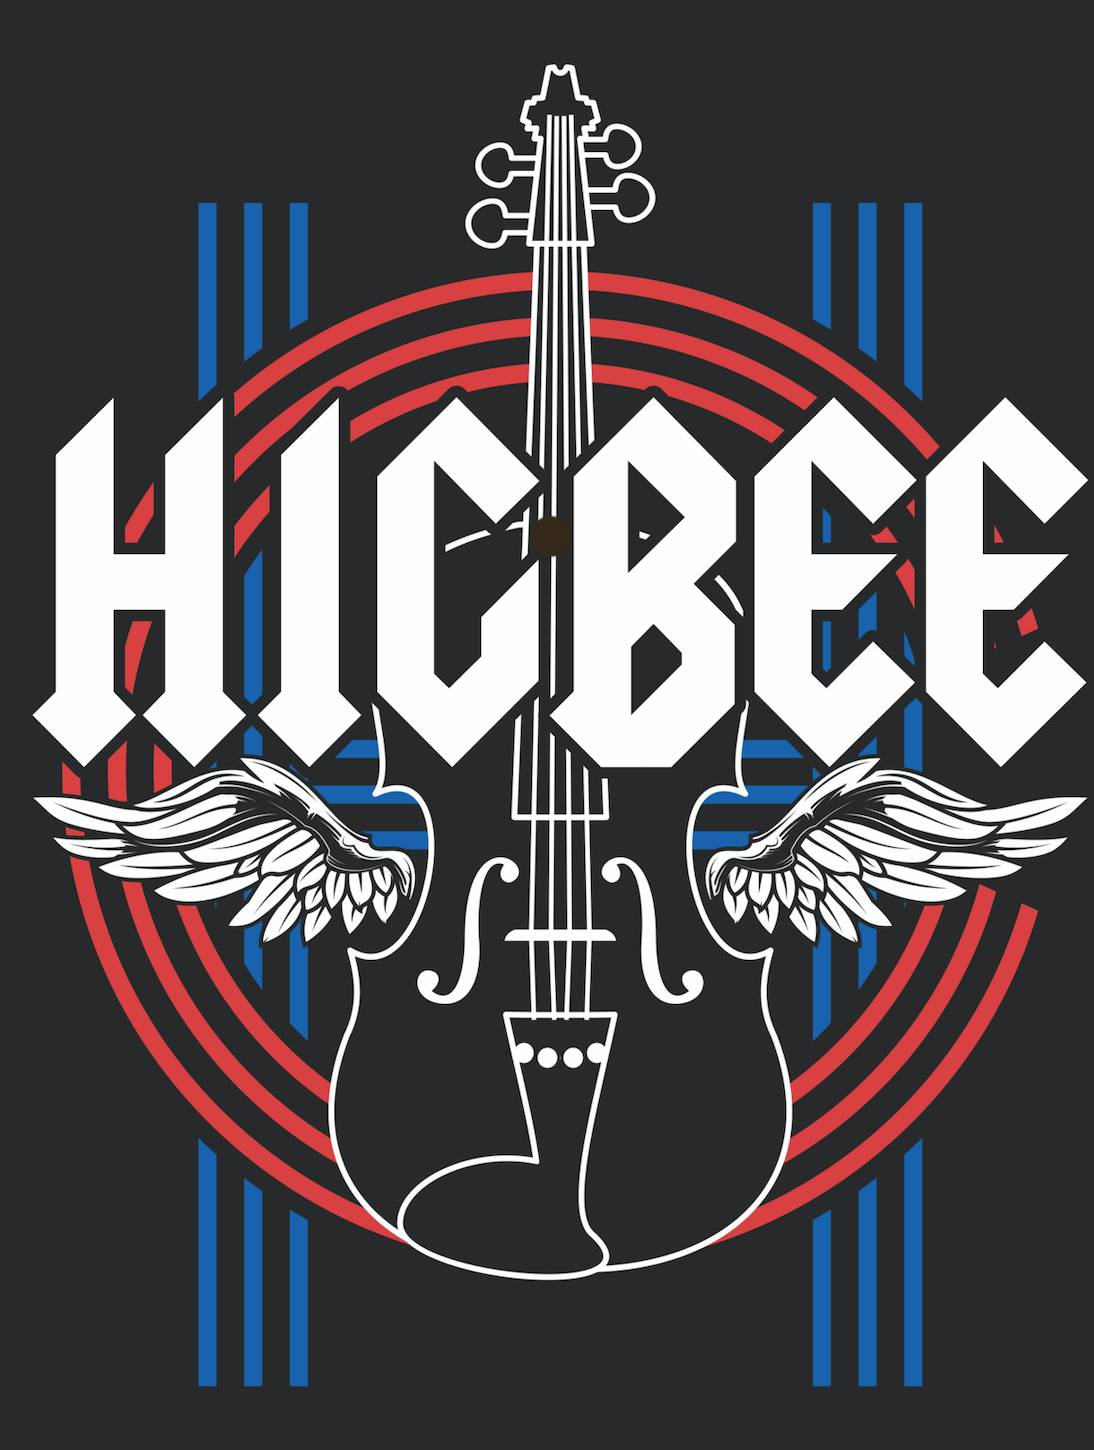 Chris Higbee Live at the Erie Sports Center